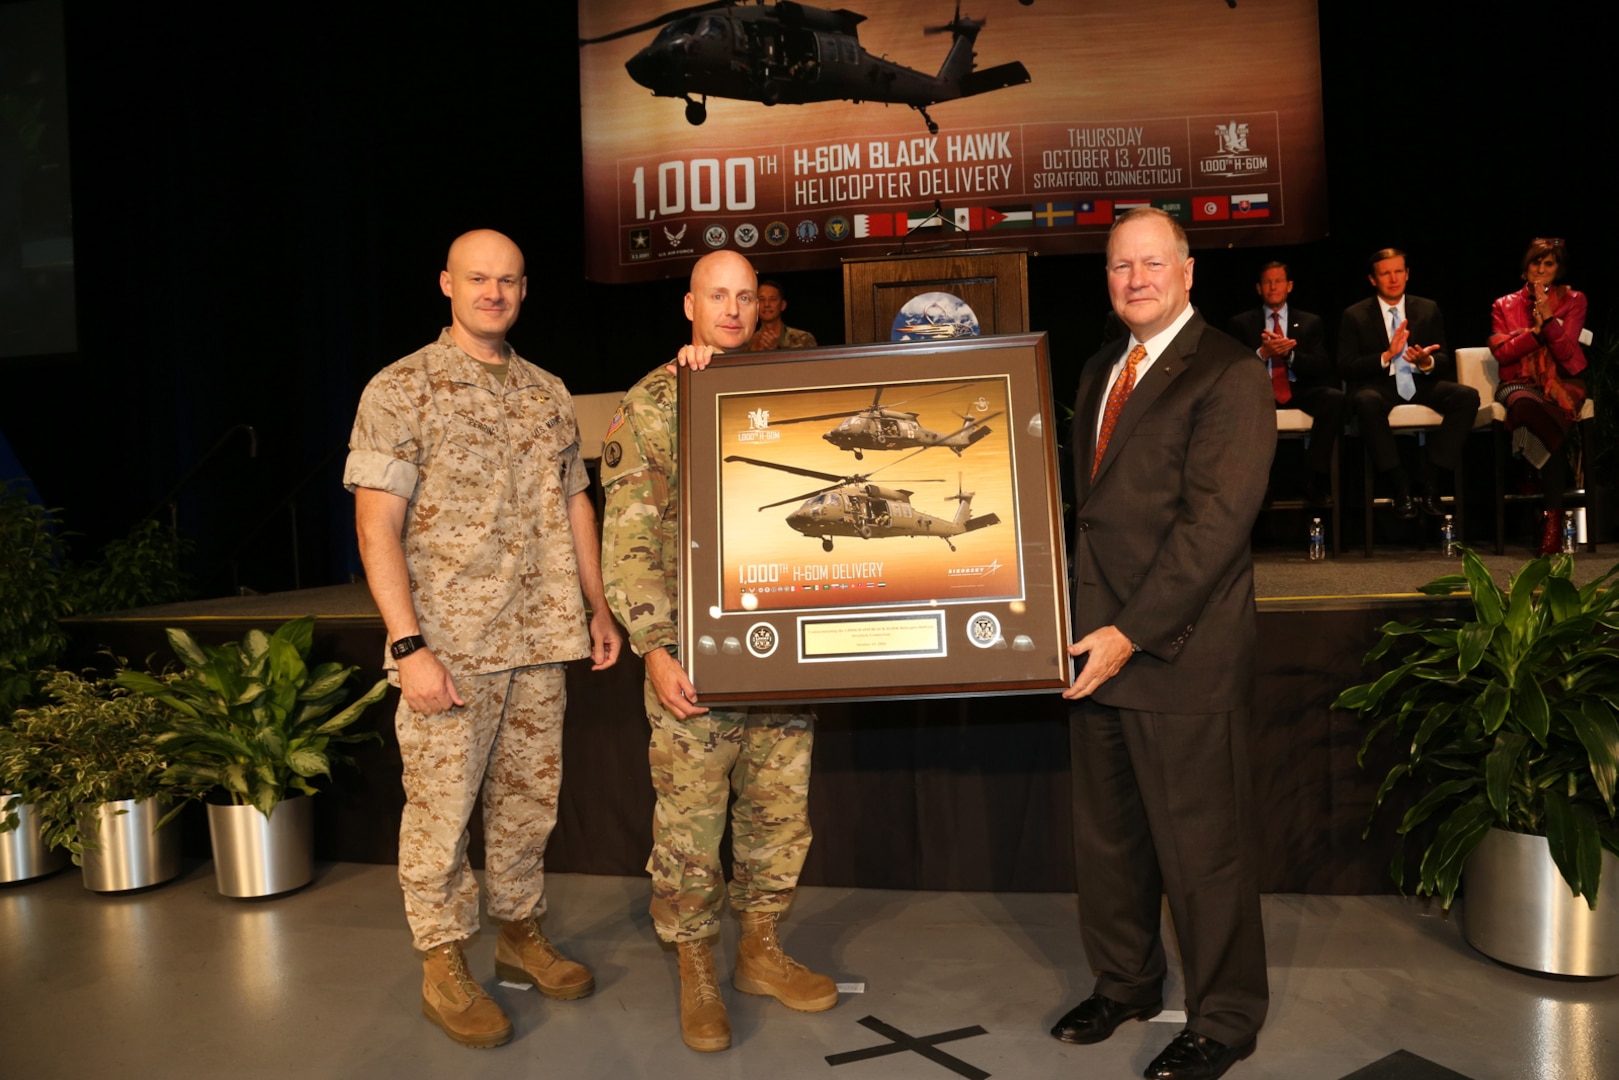 Dan Schultz (right), president of Sikorsky Aircraft, presented a commemorative plaque for the delivery of the 1000th Blackhawk delivery to the Army to Defense Contract Management Agency Sikorsky’s commander, Marine Col. Jack Perrin (far left), and Army Col. William Jackson, Utility Helicopter Program Office program manager, during an Oct. 13 ceremony in Stratford, Connecticut. (Photo courtesy of Stuart Walls and Sikorsky Aircraft)

